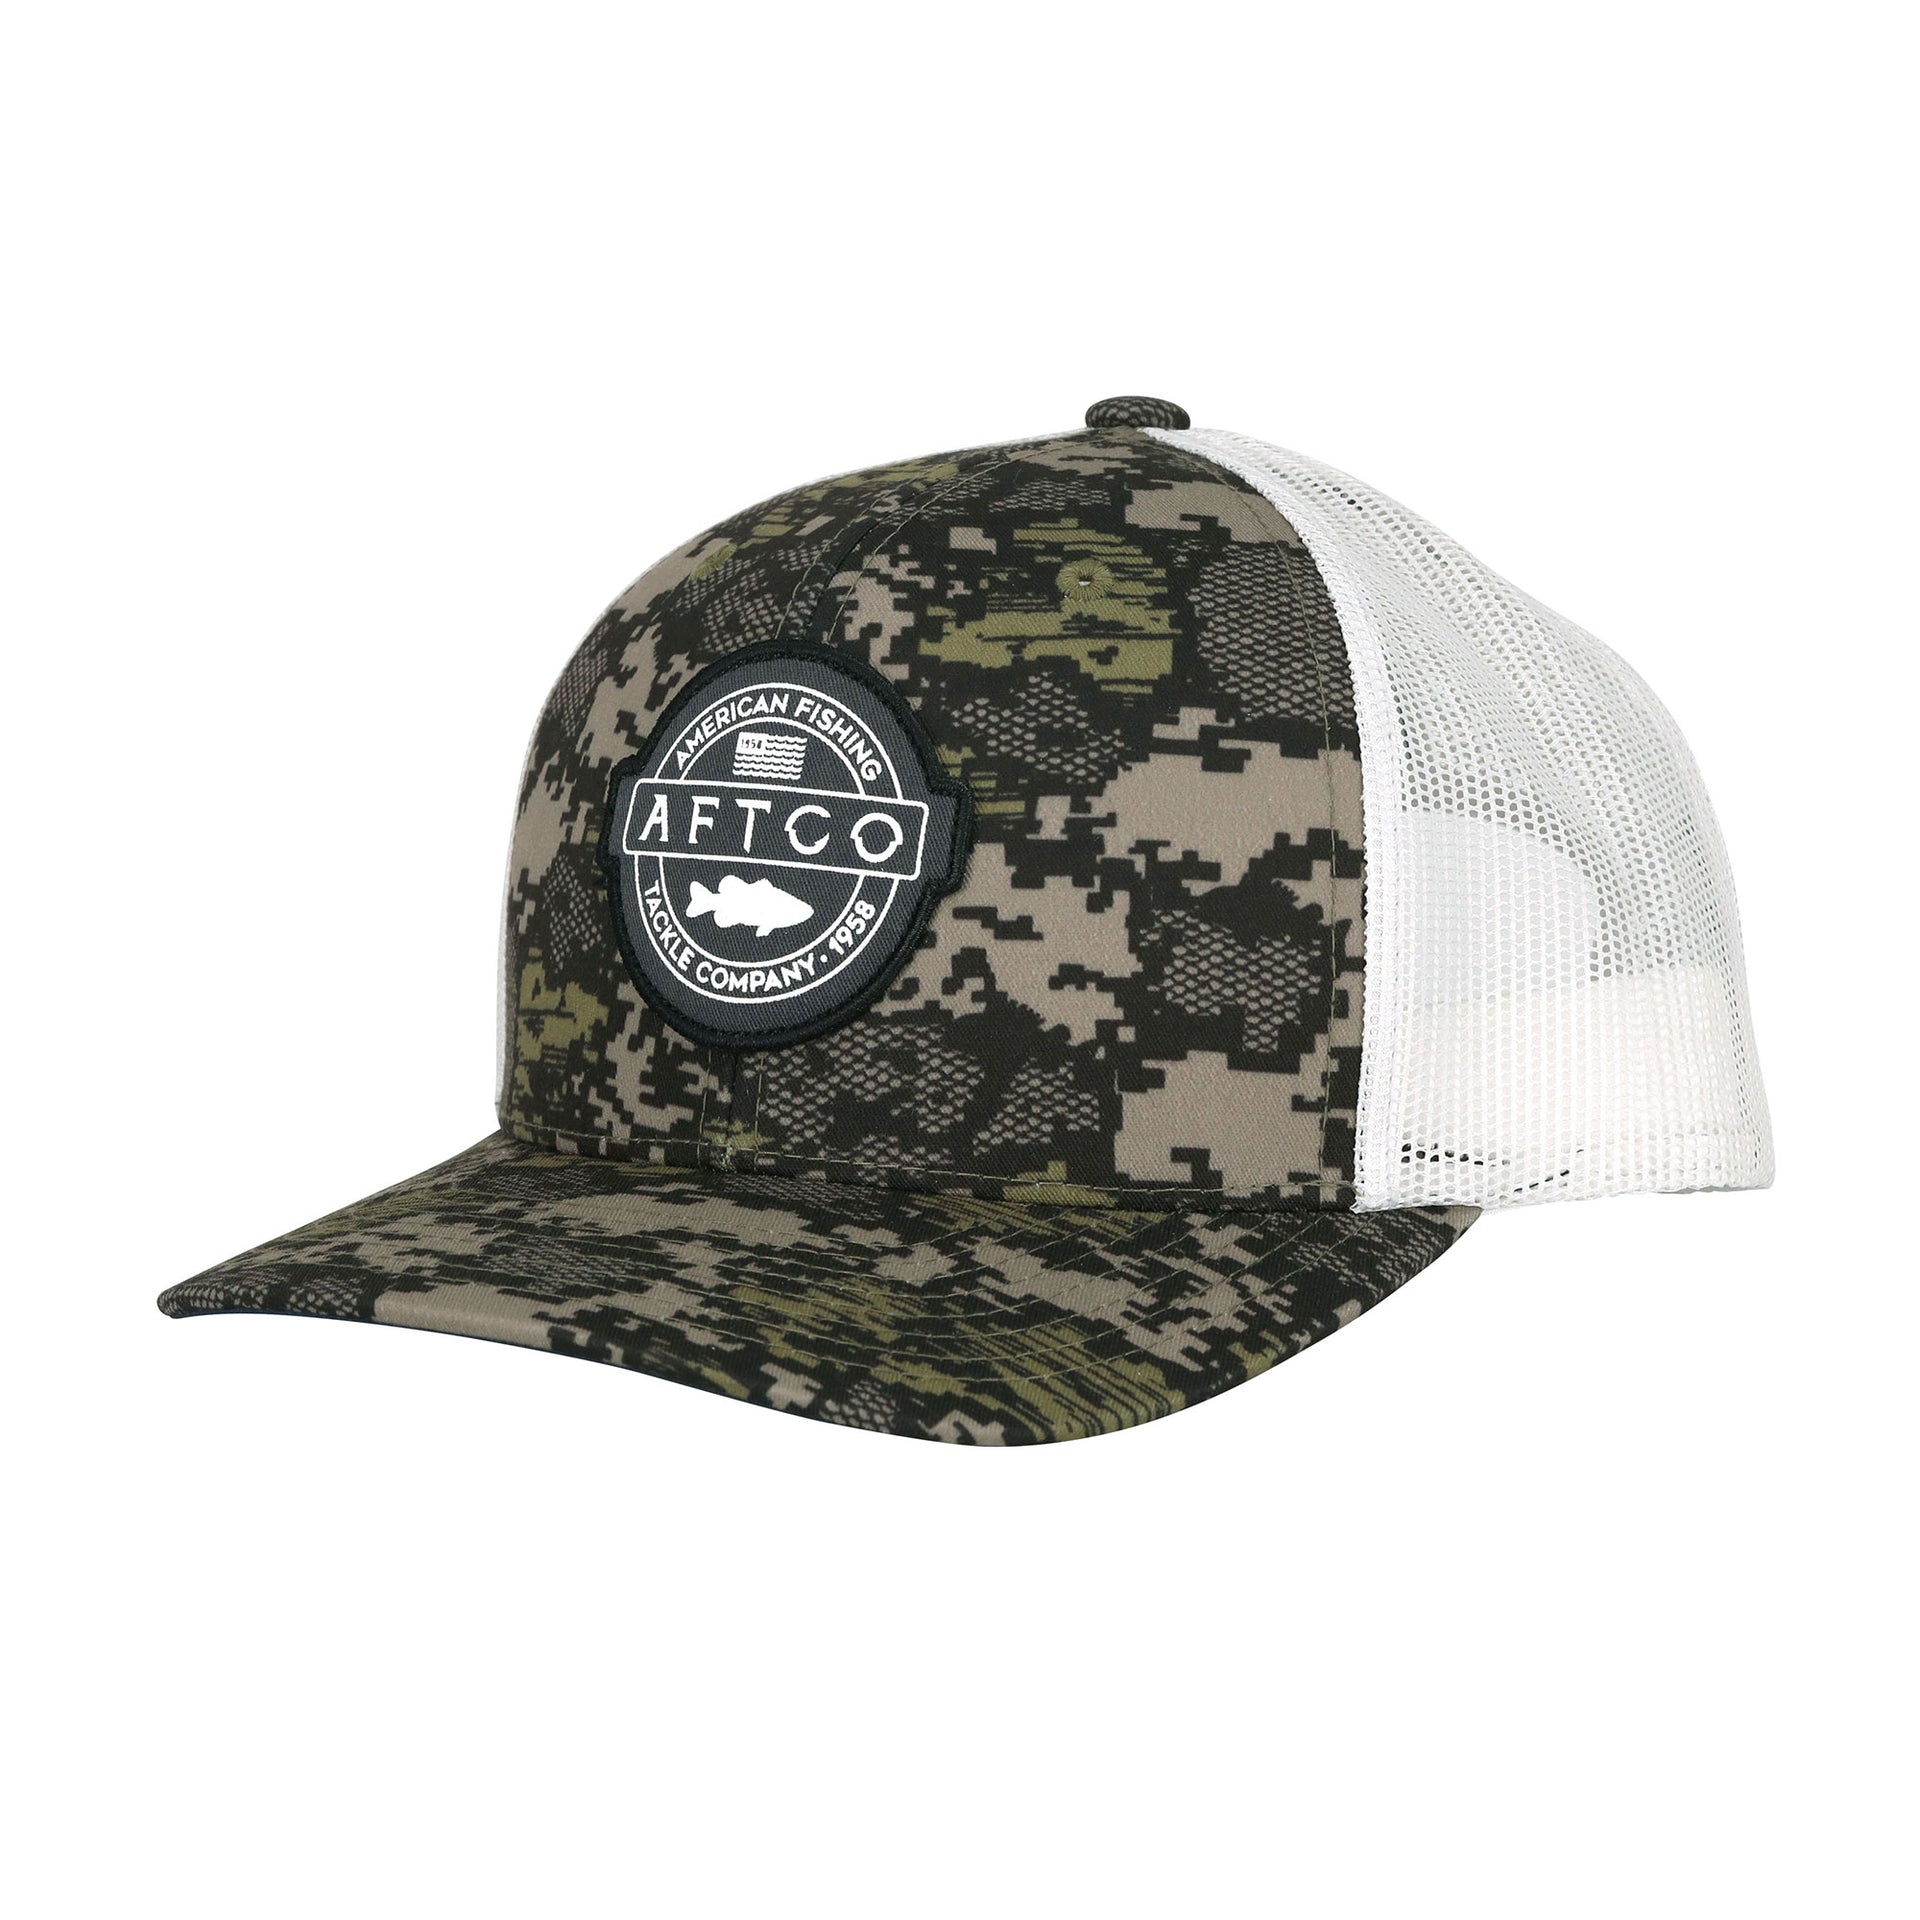 Bass Patch Trucker Hat – AFTCO